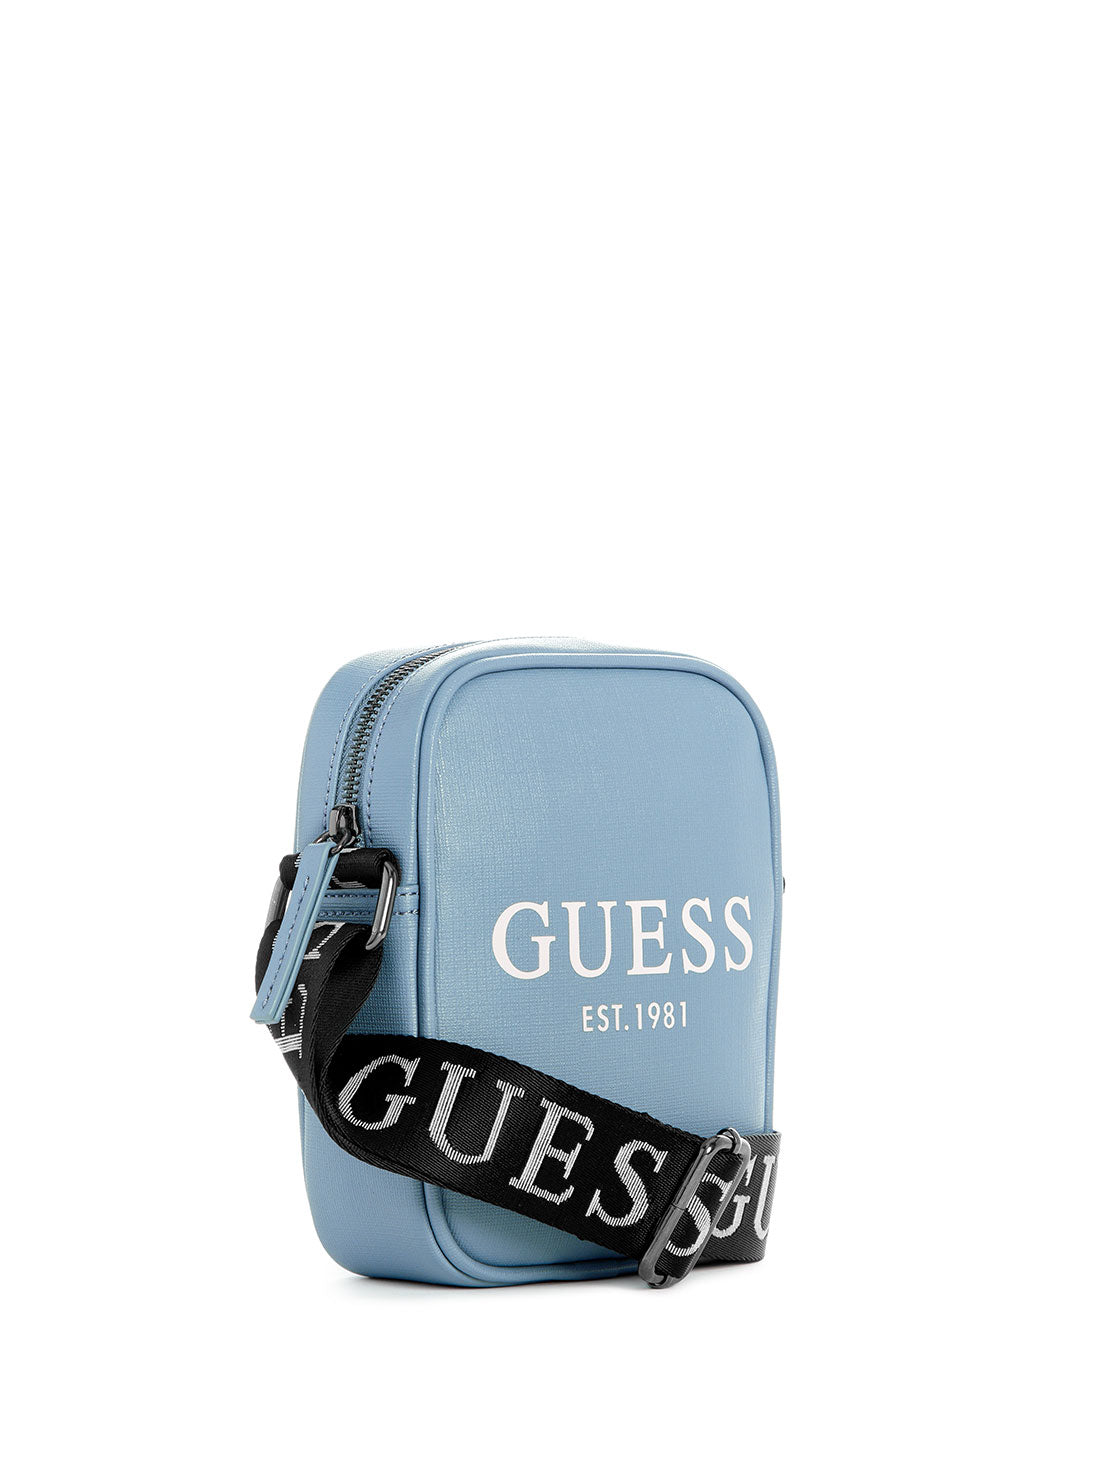 GUESS Black Logo Outfitter Camera Bag side view